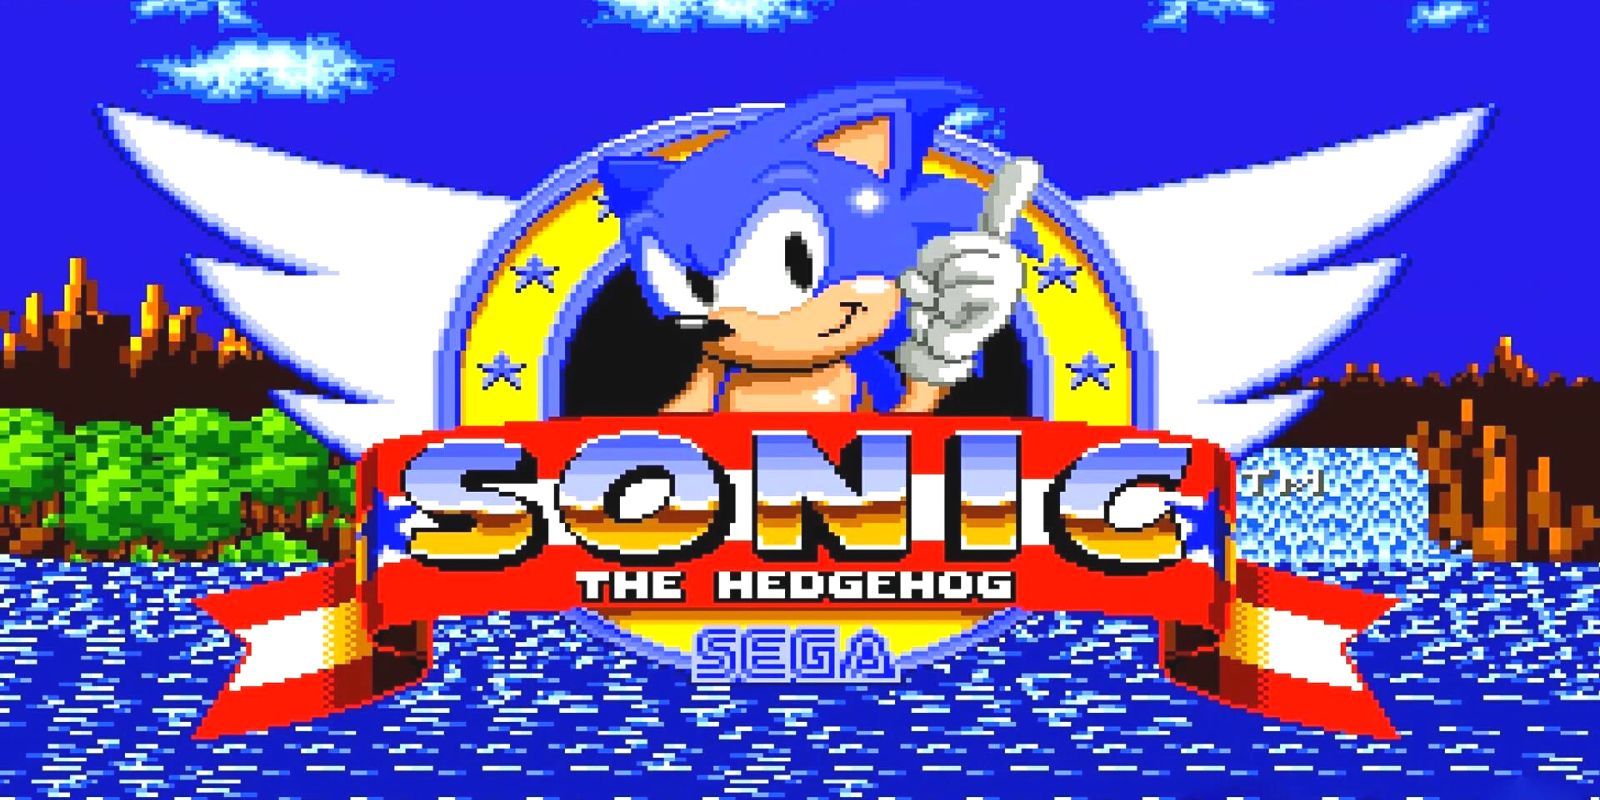 The starting screen from Sonic The Hedgehog's first game